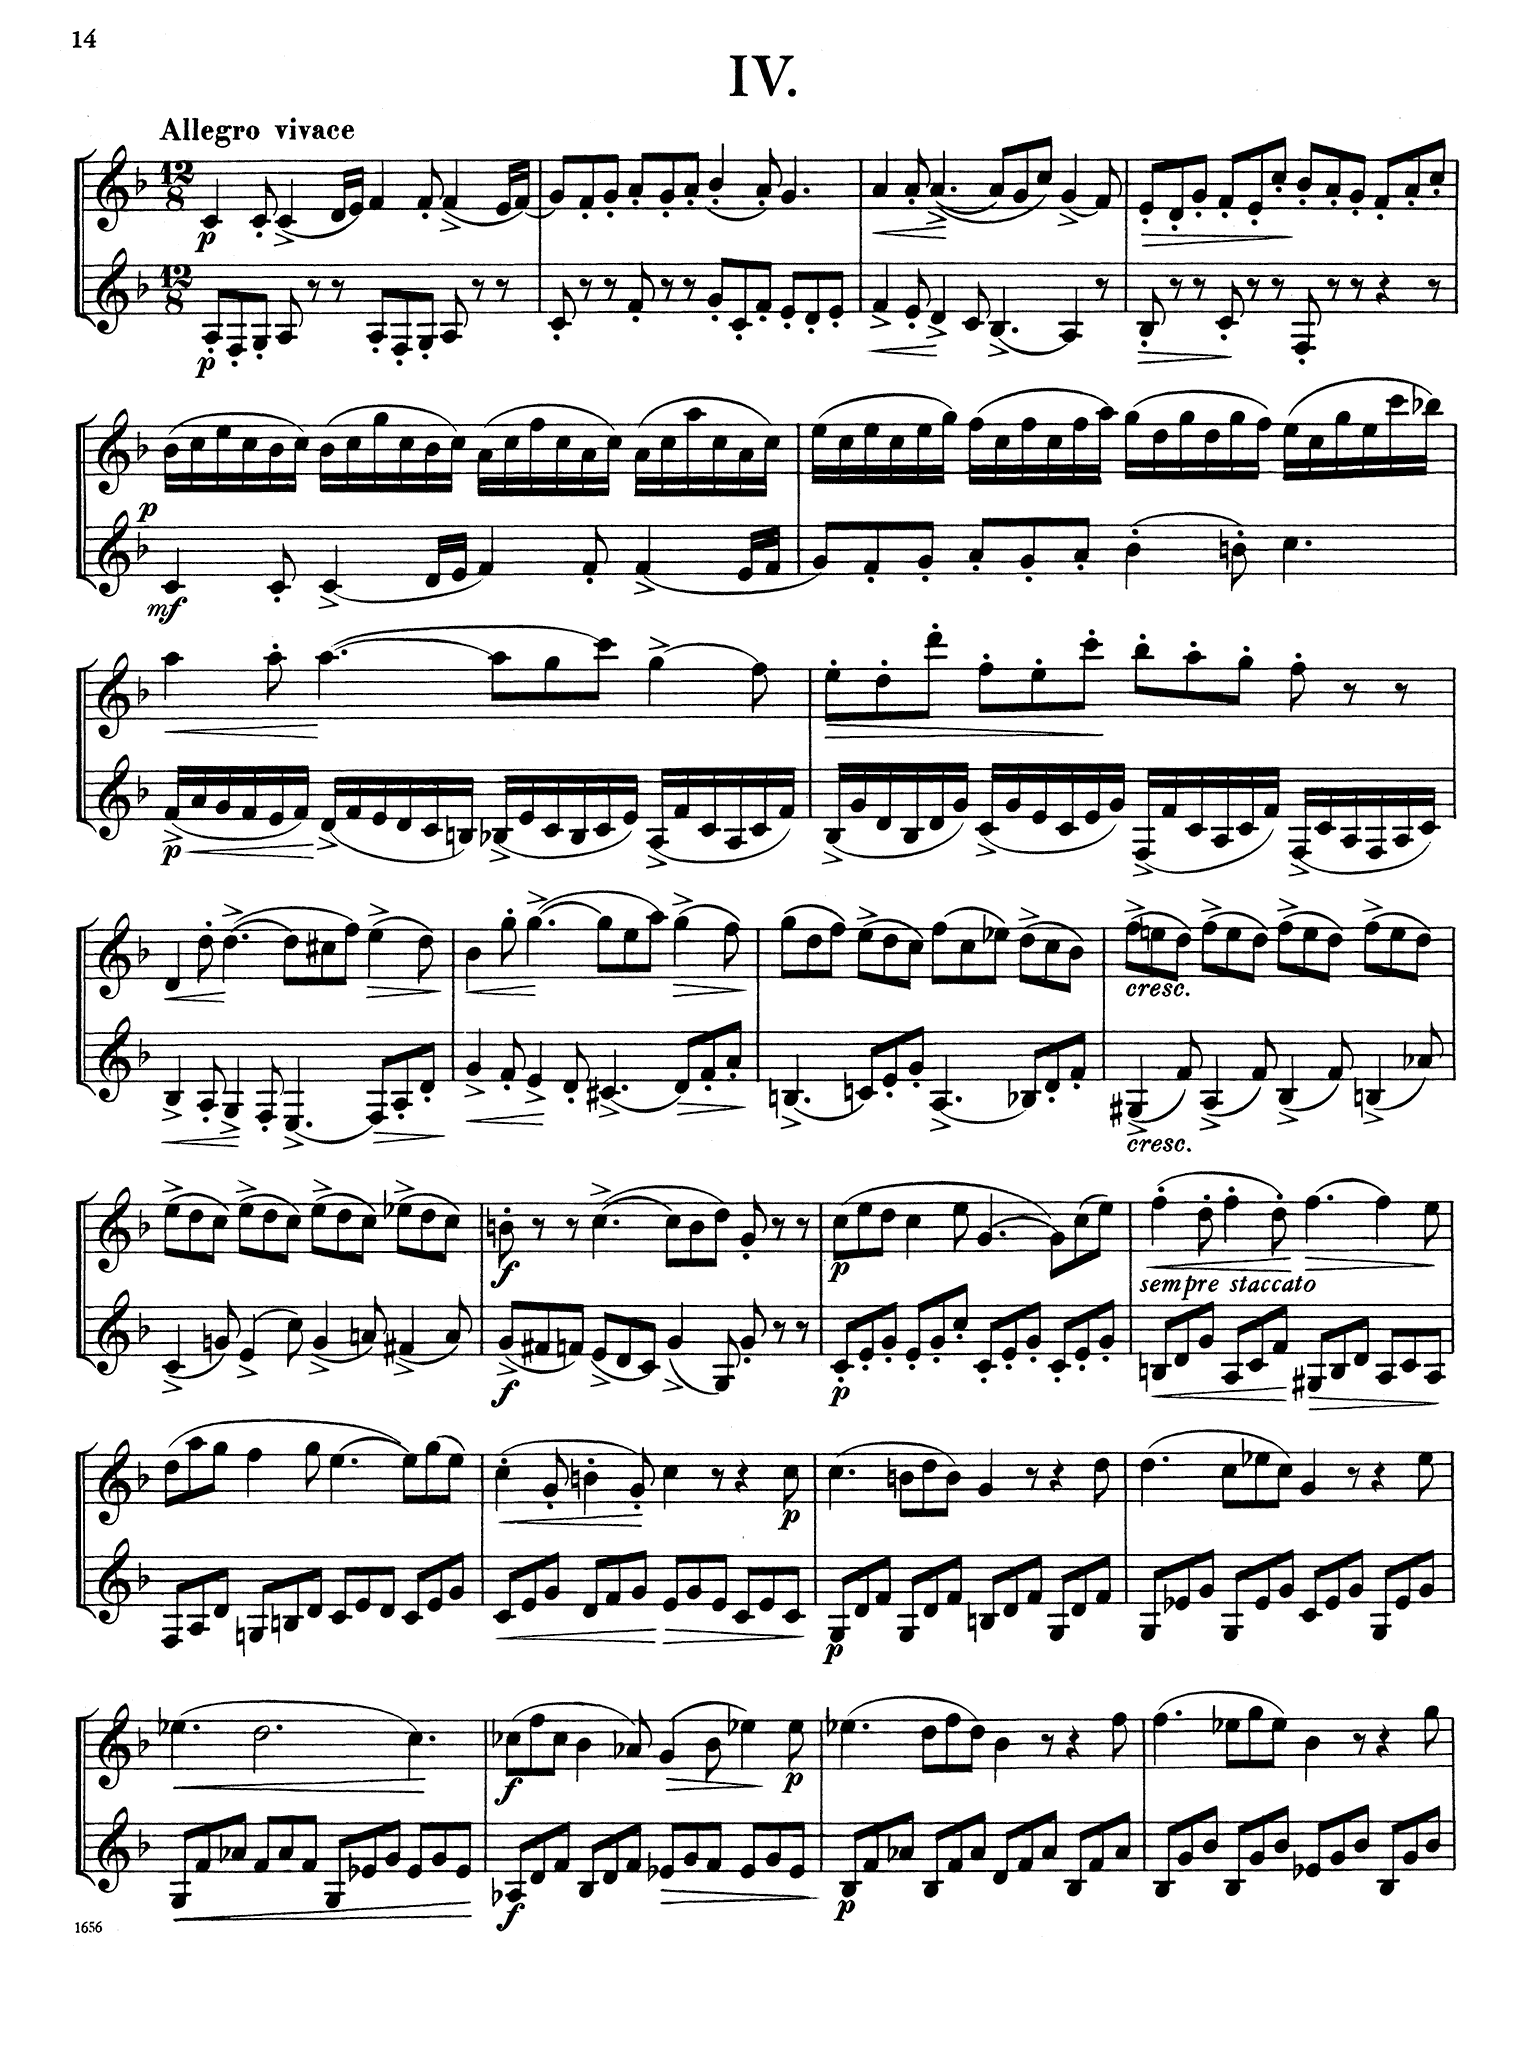 Stark Sonata for 2 Clarinets in E-flat Major, from Clarinet Method, Op. 49, Vol. 2 - Movement 4